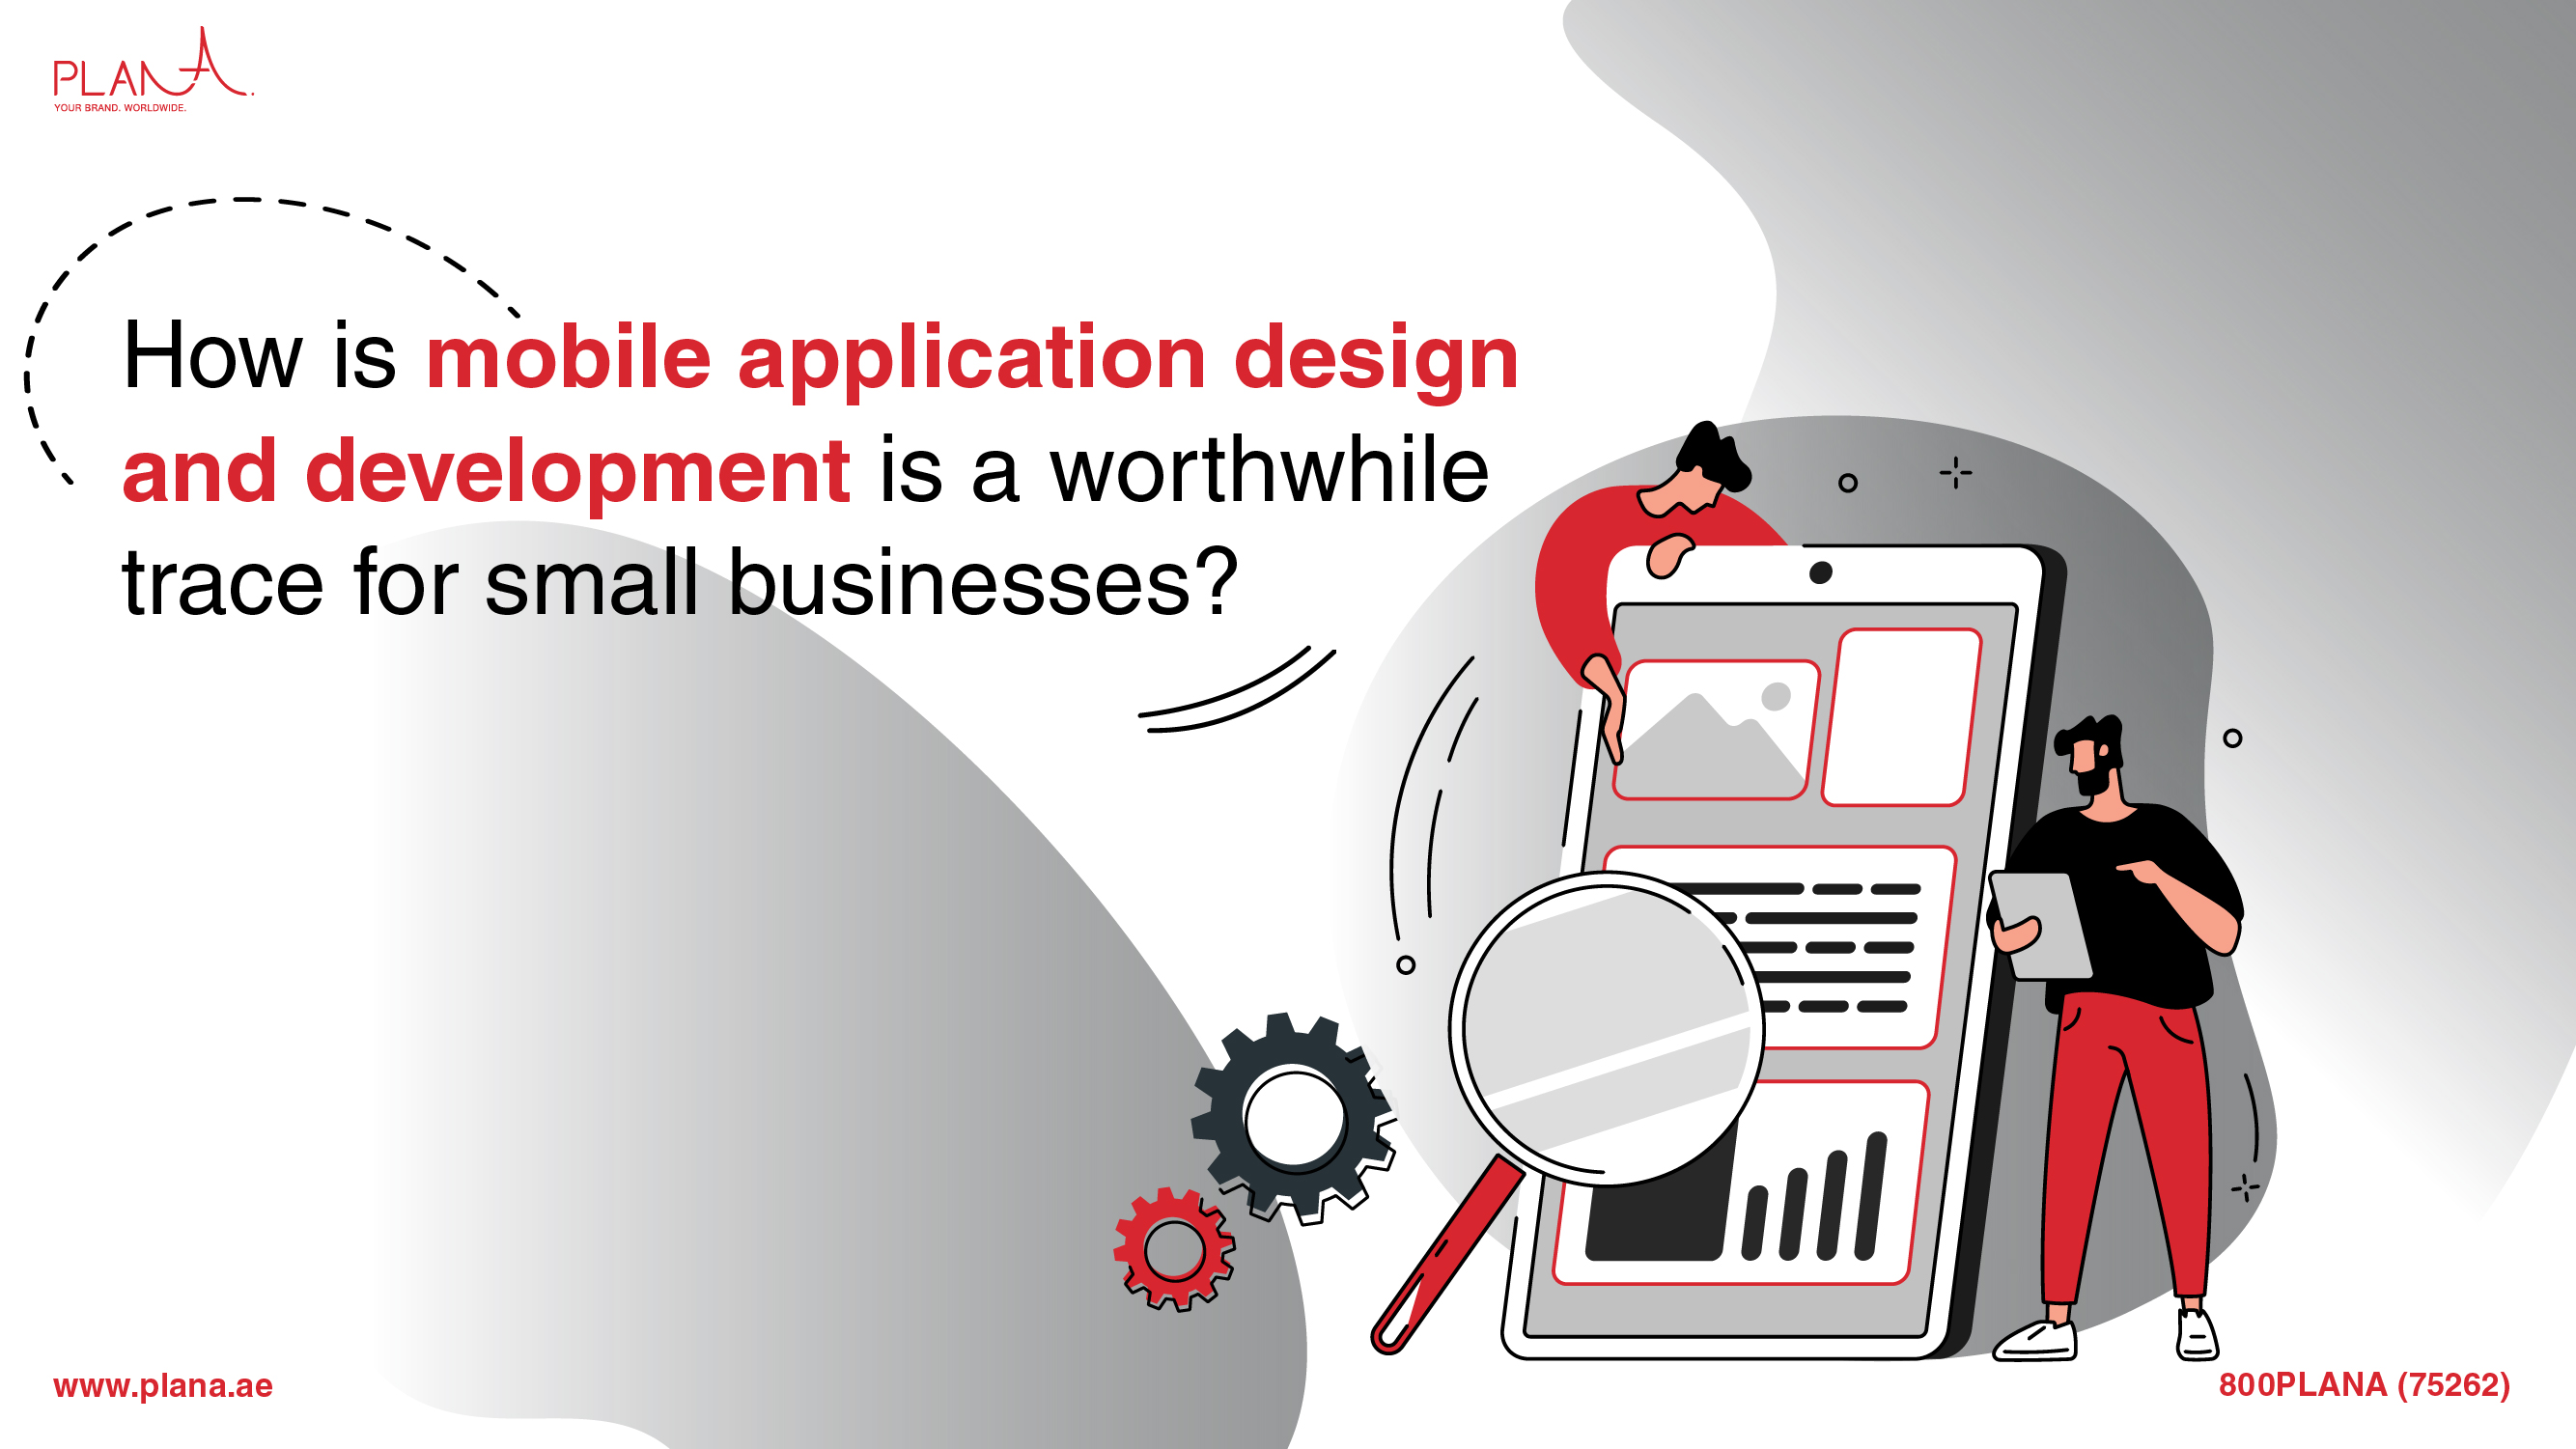 How Is Mobile Application Design and Development Is a Worthwhile Trace for Small Businesses?